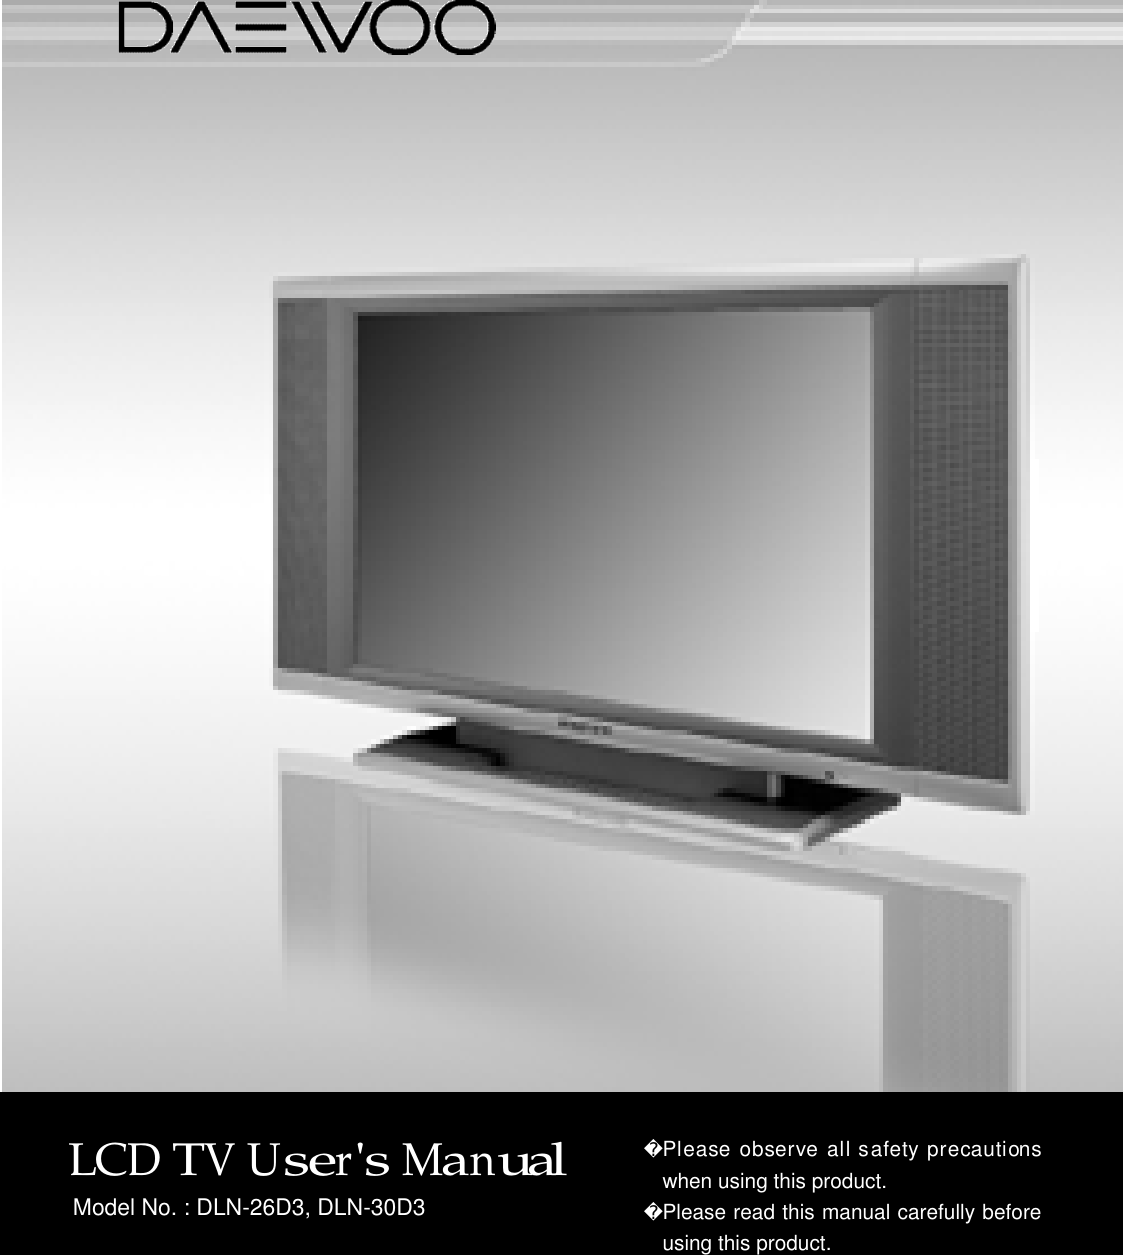 LCD TV User&apos;s Manu a lPlease observe all safety precautionswhen using this product.Please read this manual carefully beforeusing this product.Model No. : DLN-26D3, DLN-30D3